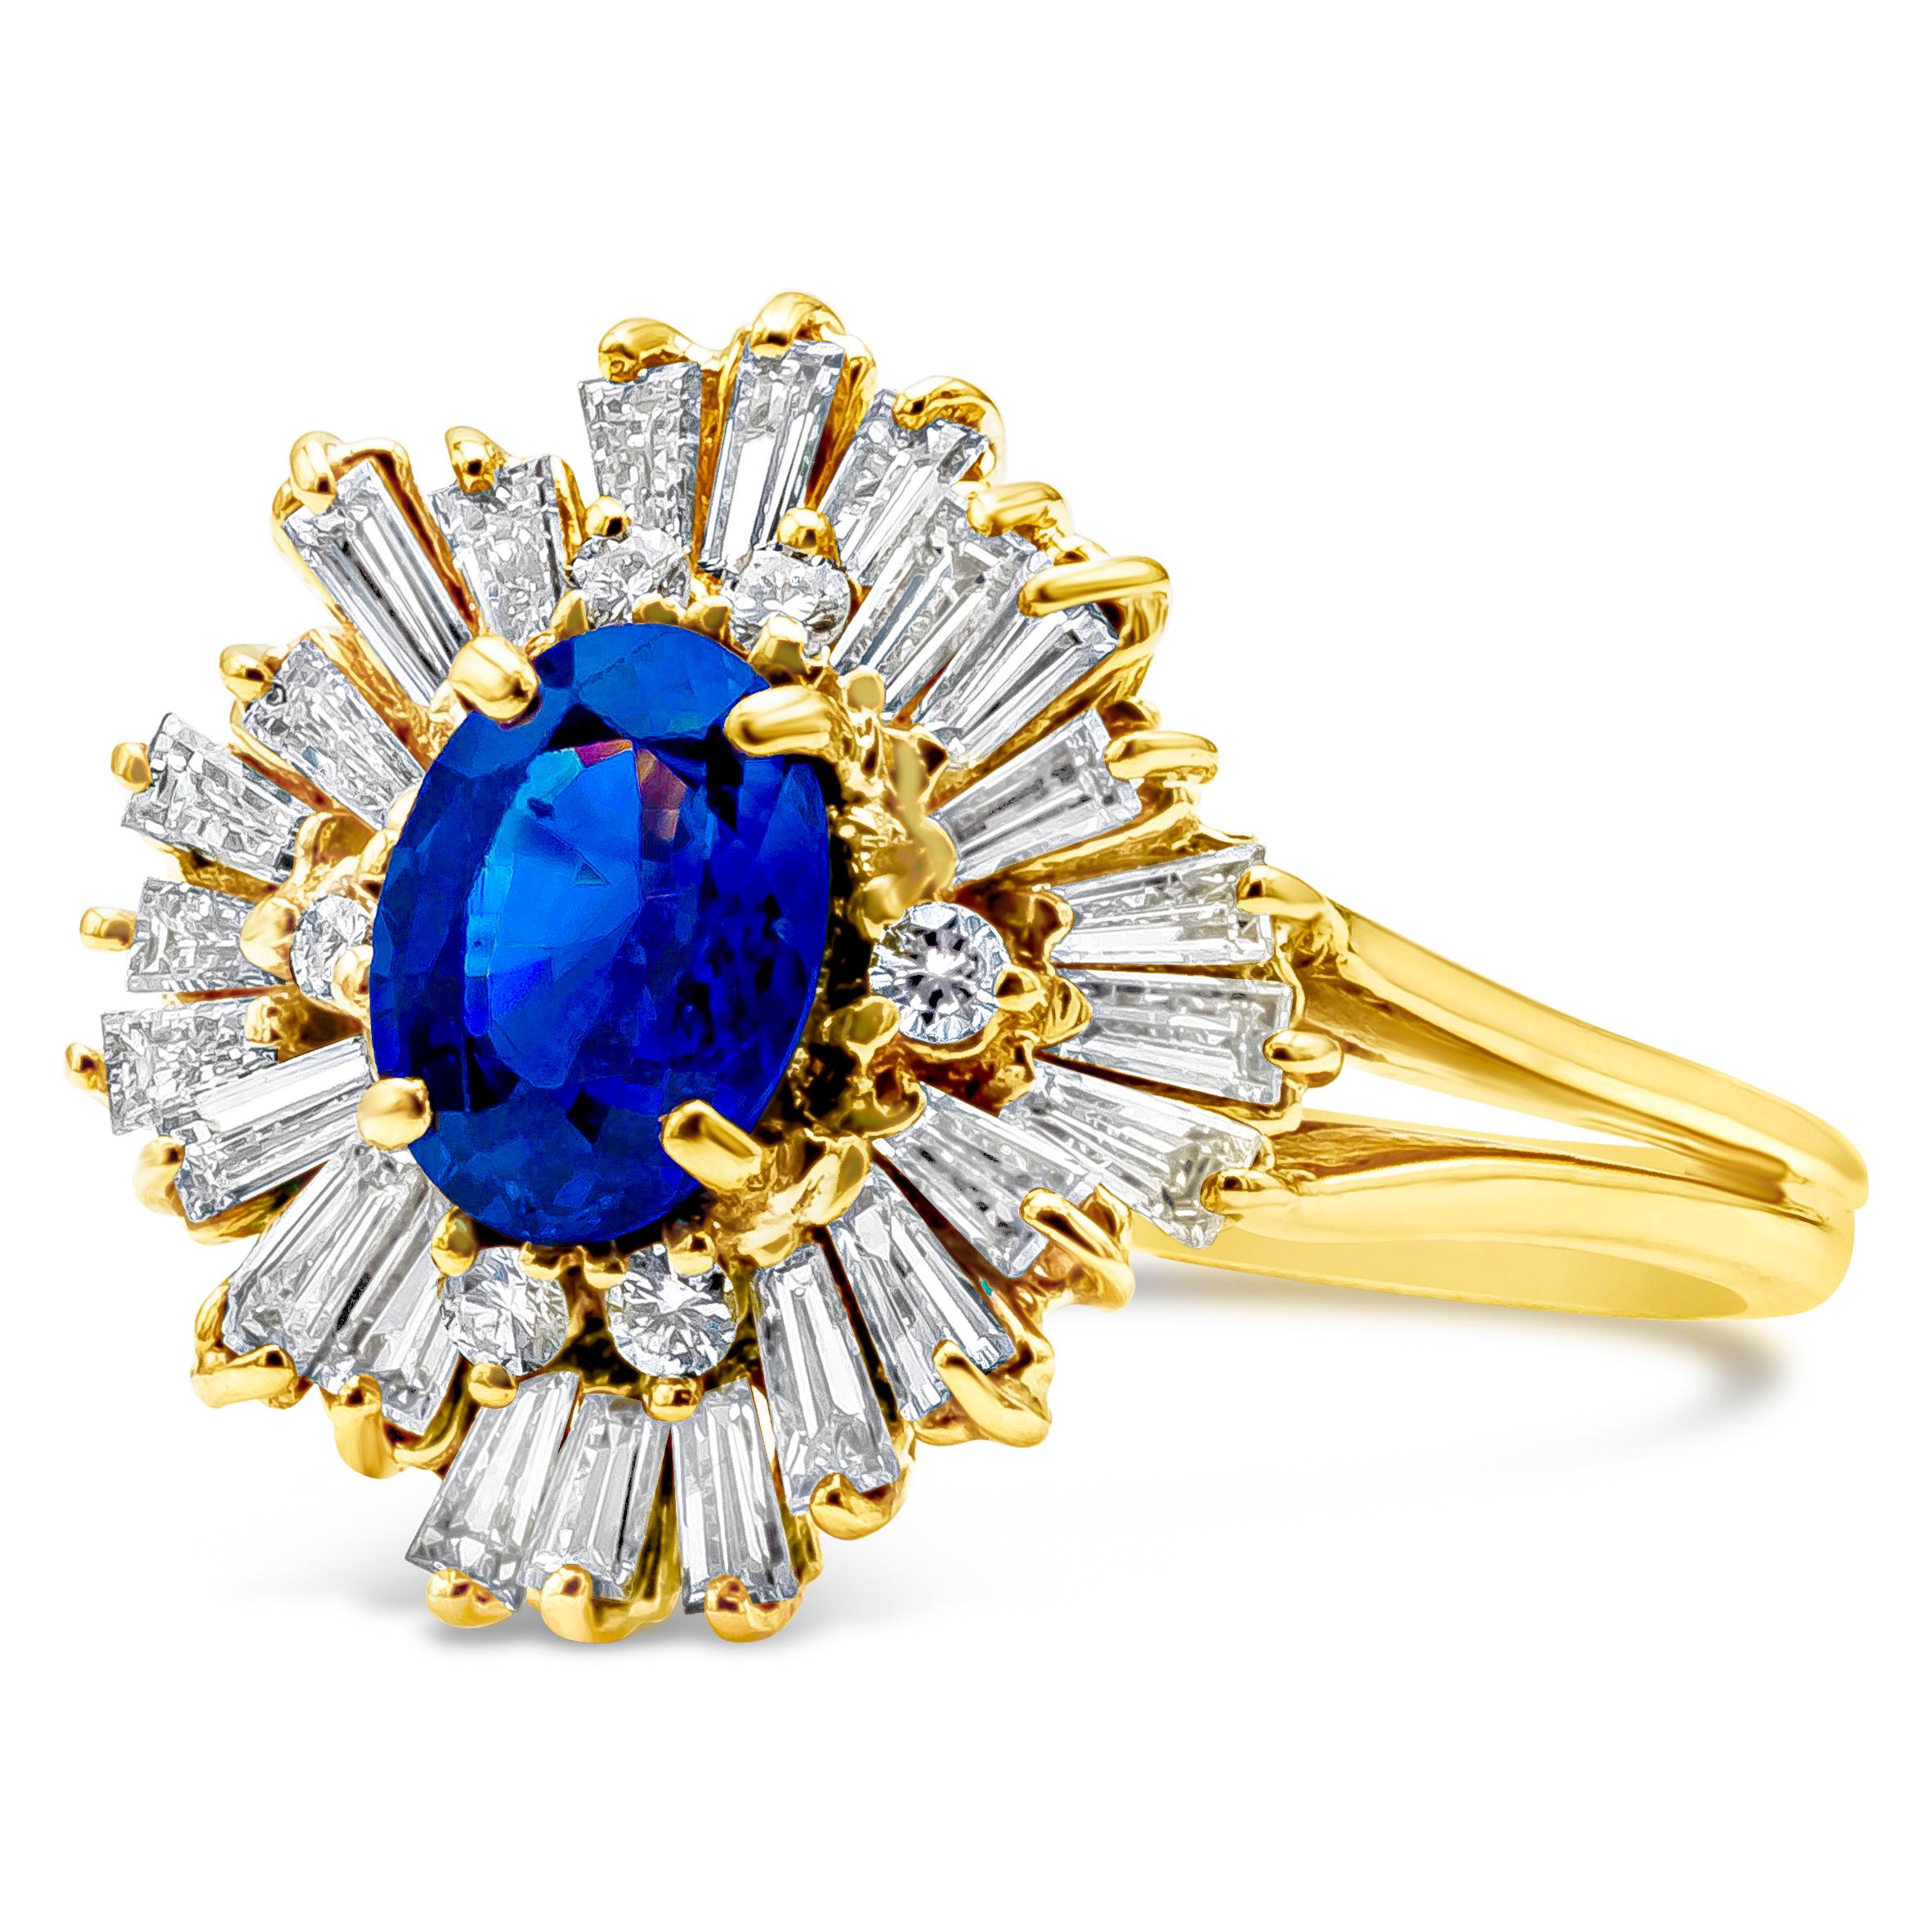 Features a color-rich oval cut blue sapphire weighing 1.17 carats cluster fashion ring, surrounded with mix of baguette and round diamonds weighing 1.59 carats total, G color and VS-SI in Clarity. Set in and finished in a semi - split shank 18K